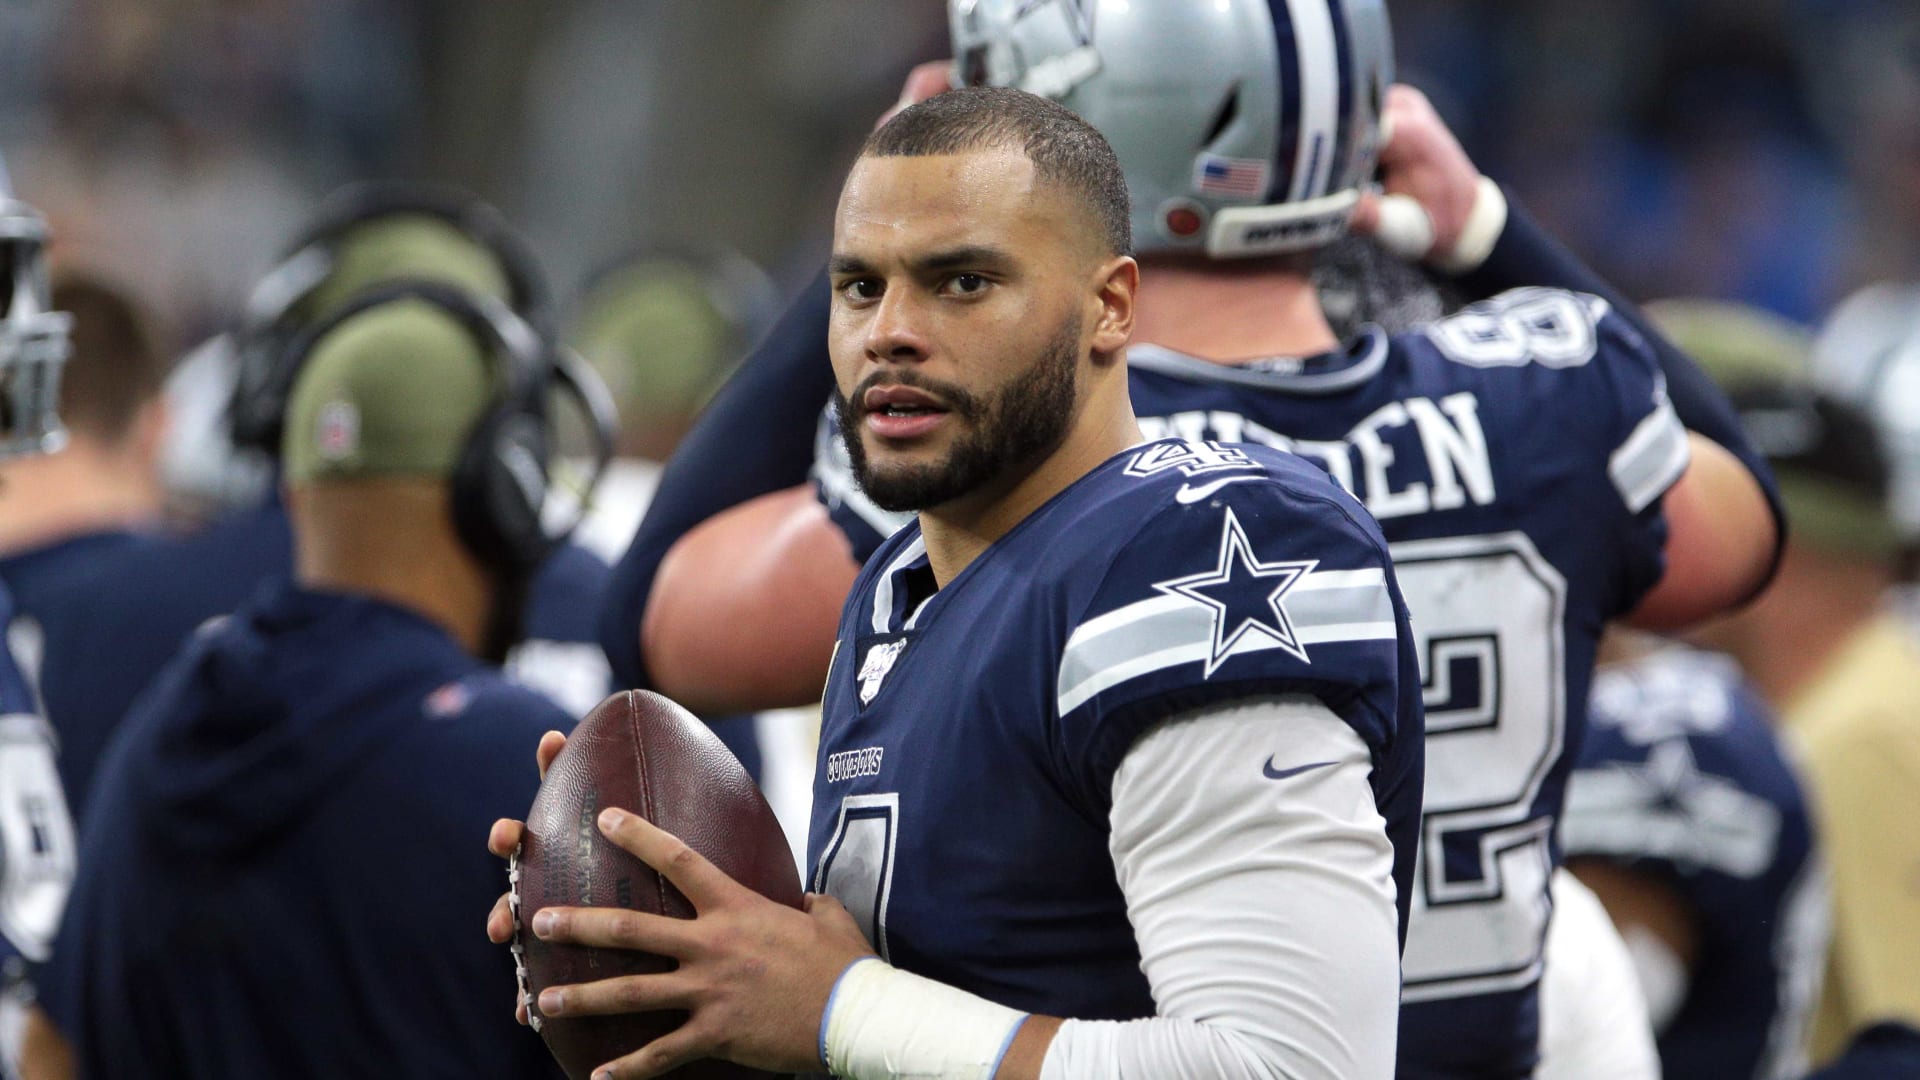 Dak Prescott Opened Up About His Struggles With Depression. It's a Lesson in Effective Leadership | Inc.com